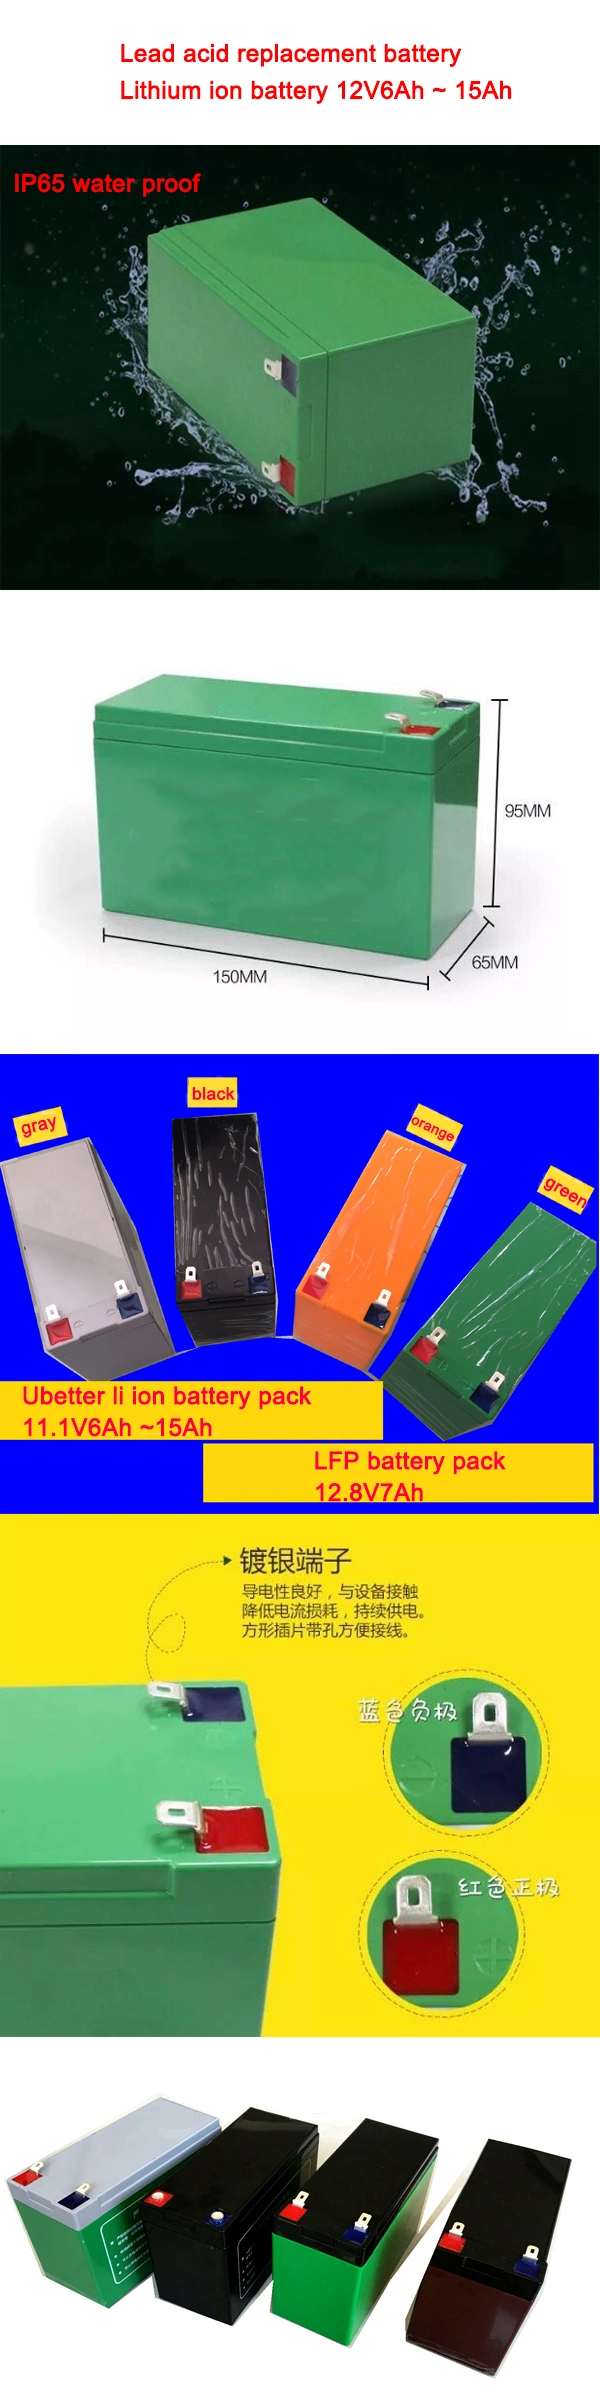 OEM 12V 8ah Lithium Ion Battery LiFePO4 Battery LFP Battery for Electric Vehicles